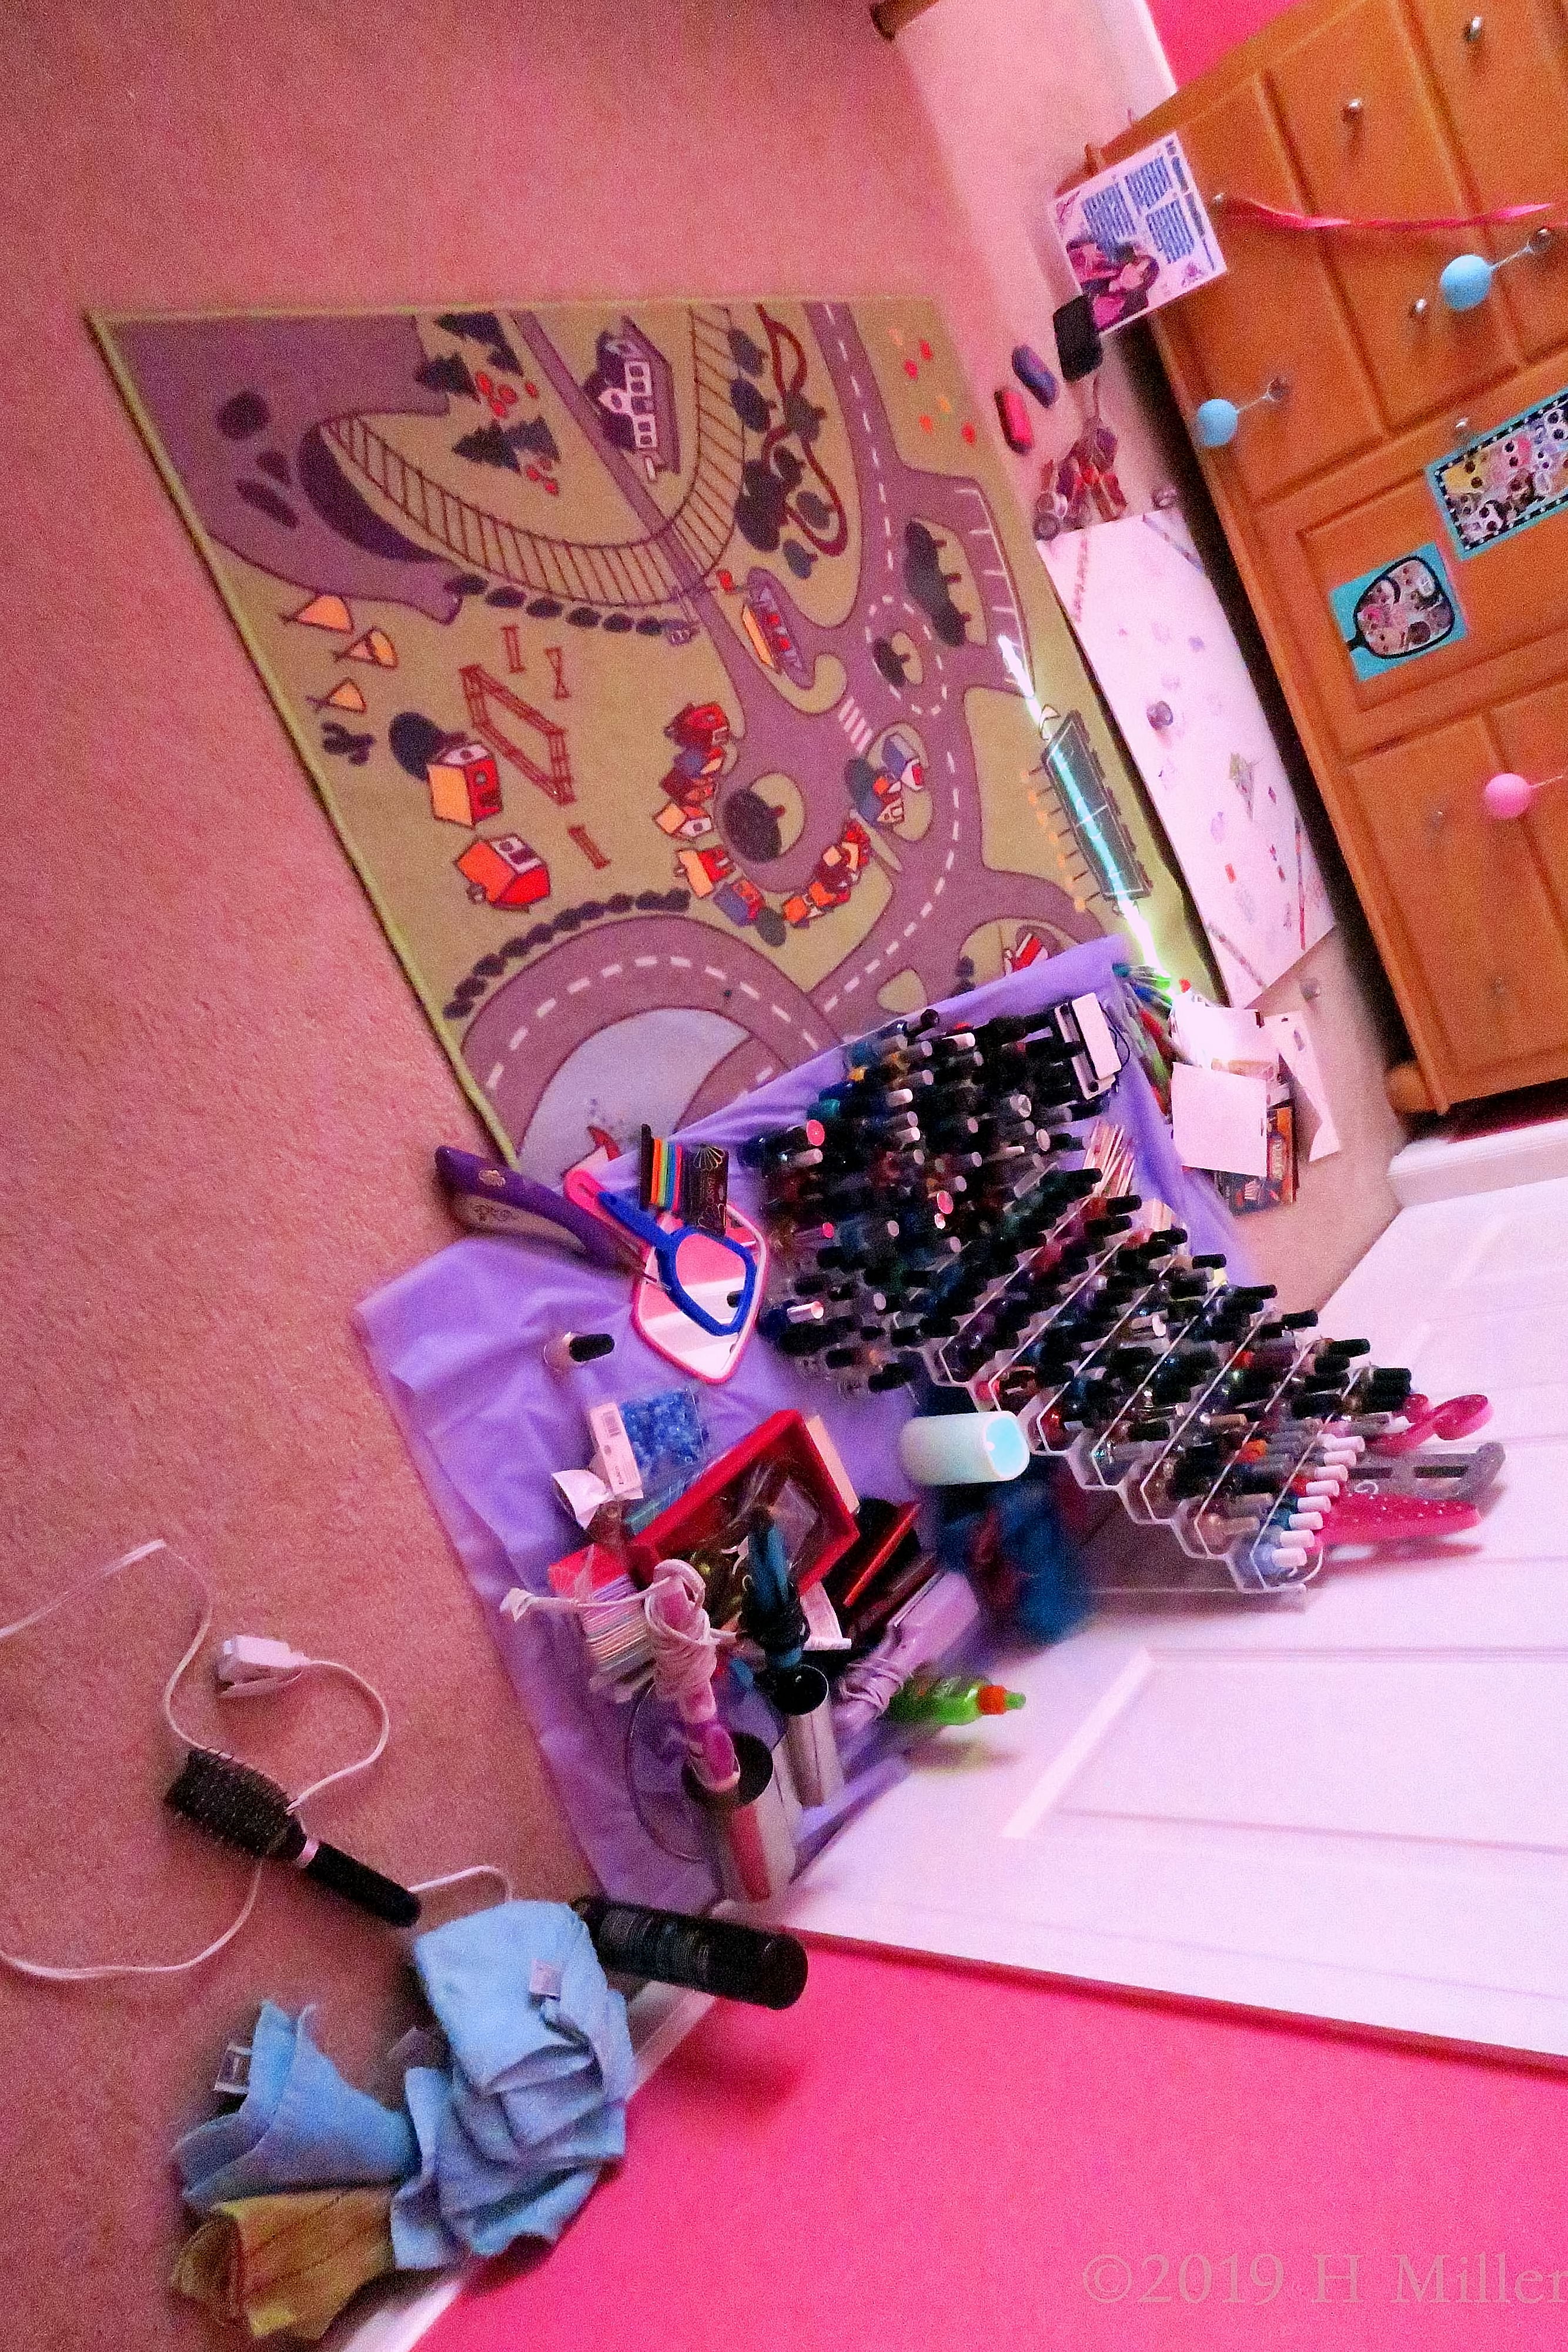 A Huge Collecttion Of Nail Polish With Different Colors 